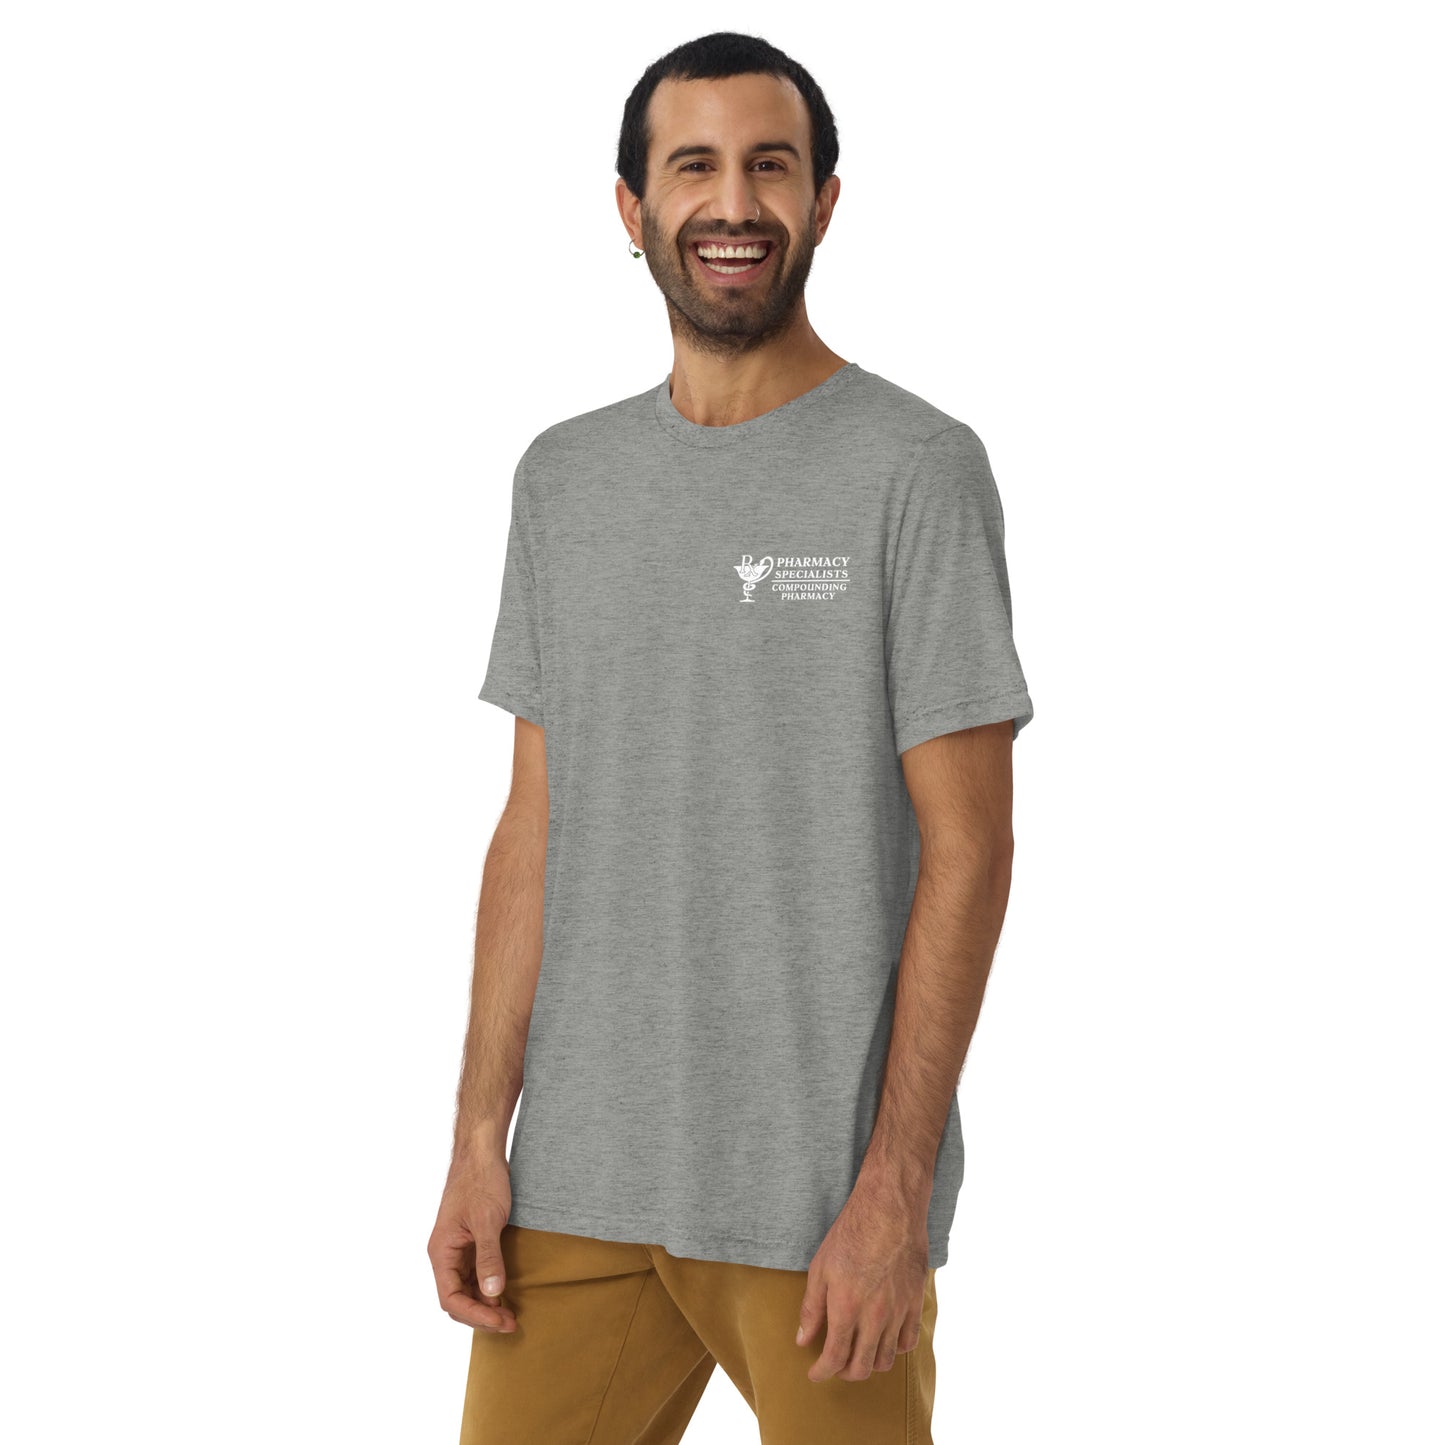 Extra-soft Triblend T-shirt - Pharmacy Specialists